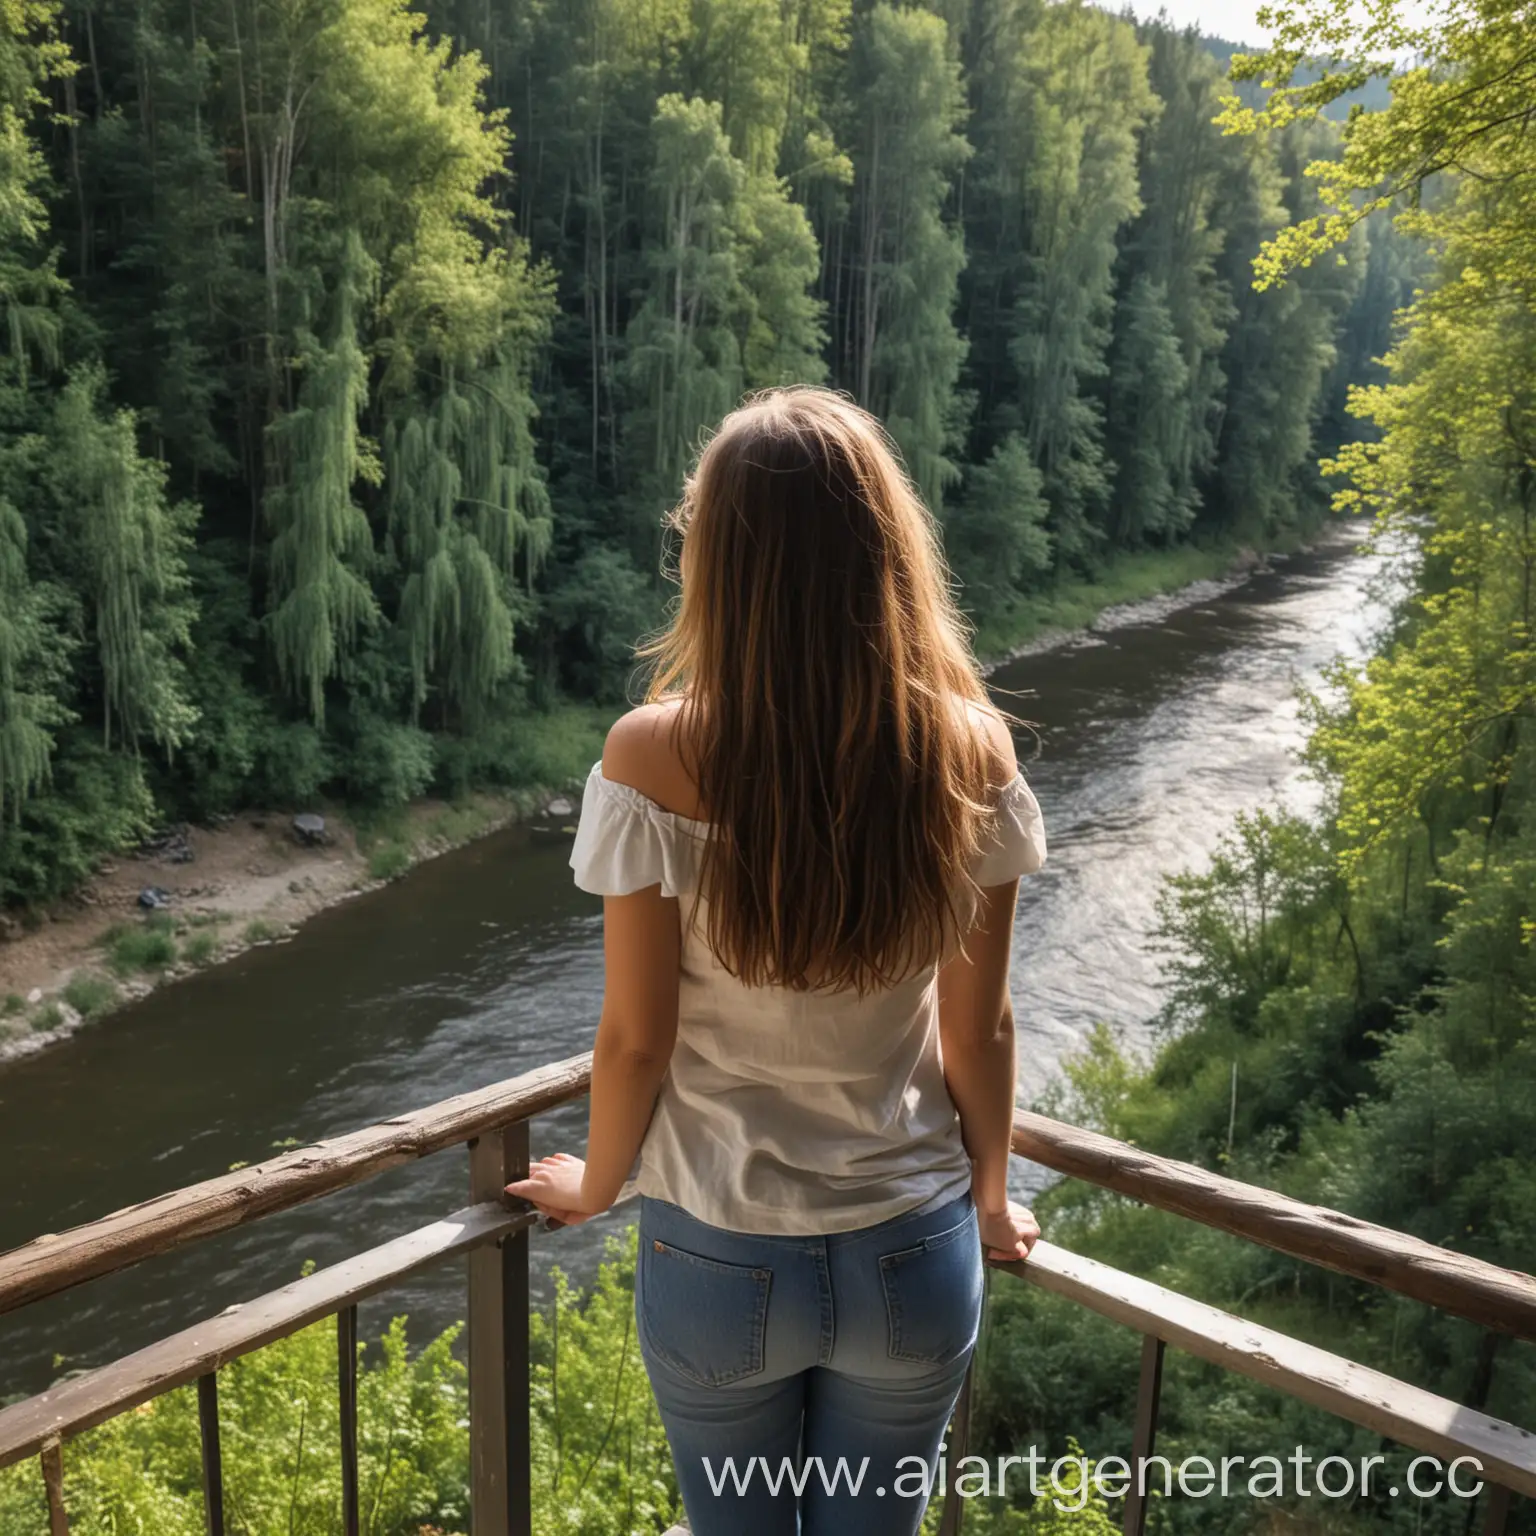 Young-Girl-Admiring-River-and-Forest-Scenery-from-Balcony